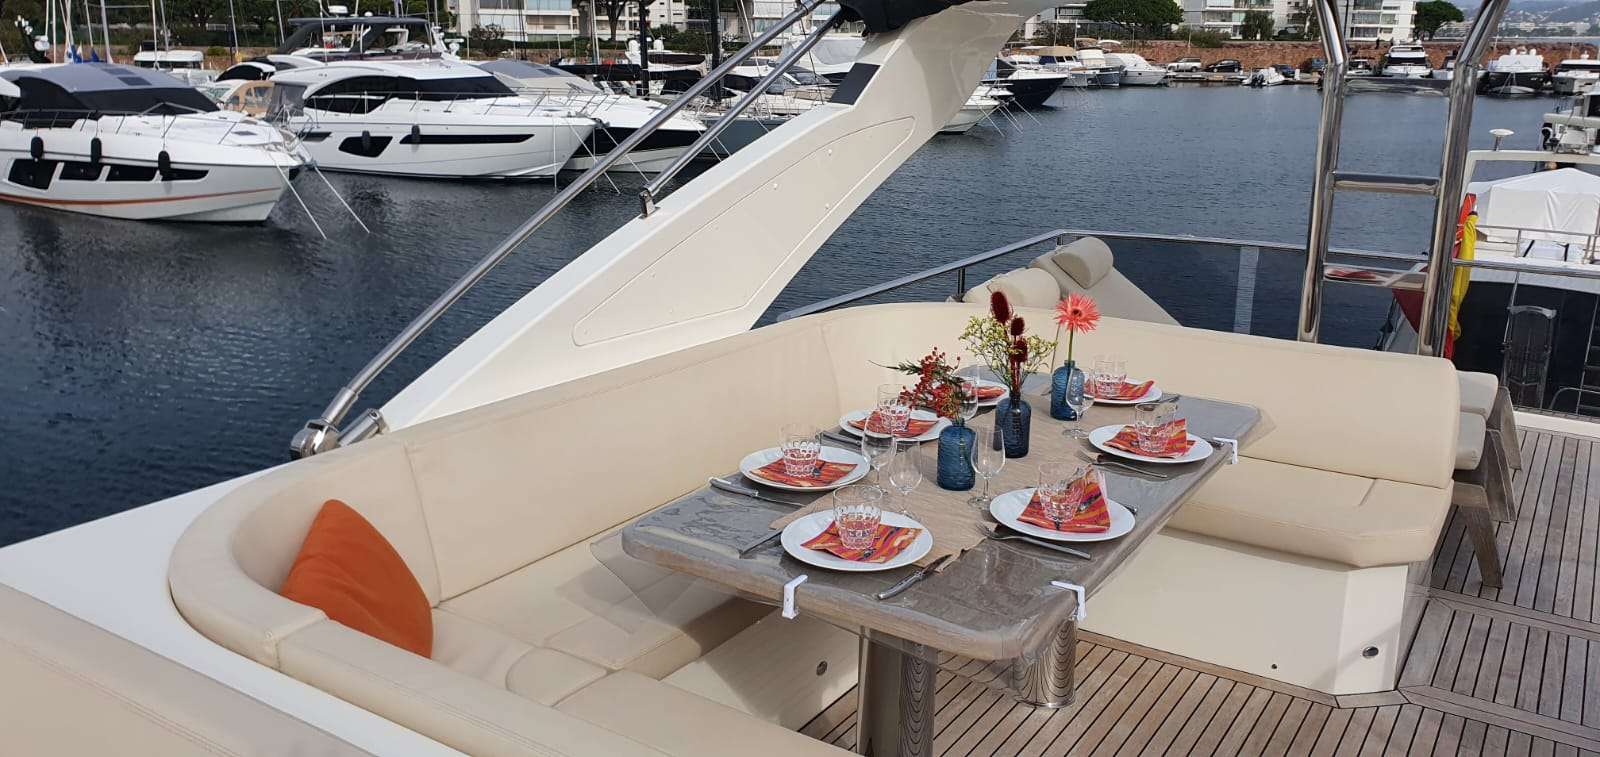 ABSOLUTE - Yacht Charter Antibes & Boat hire in Fr. Riviera, Corsica & Sardinia 3